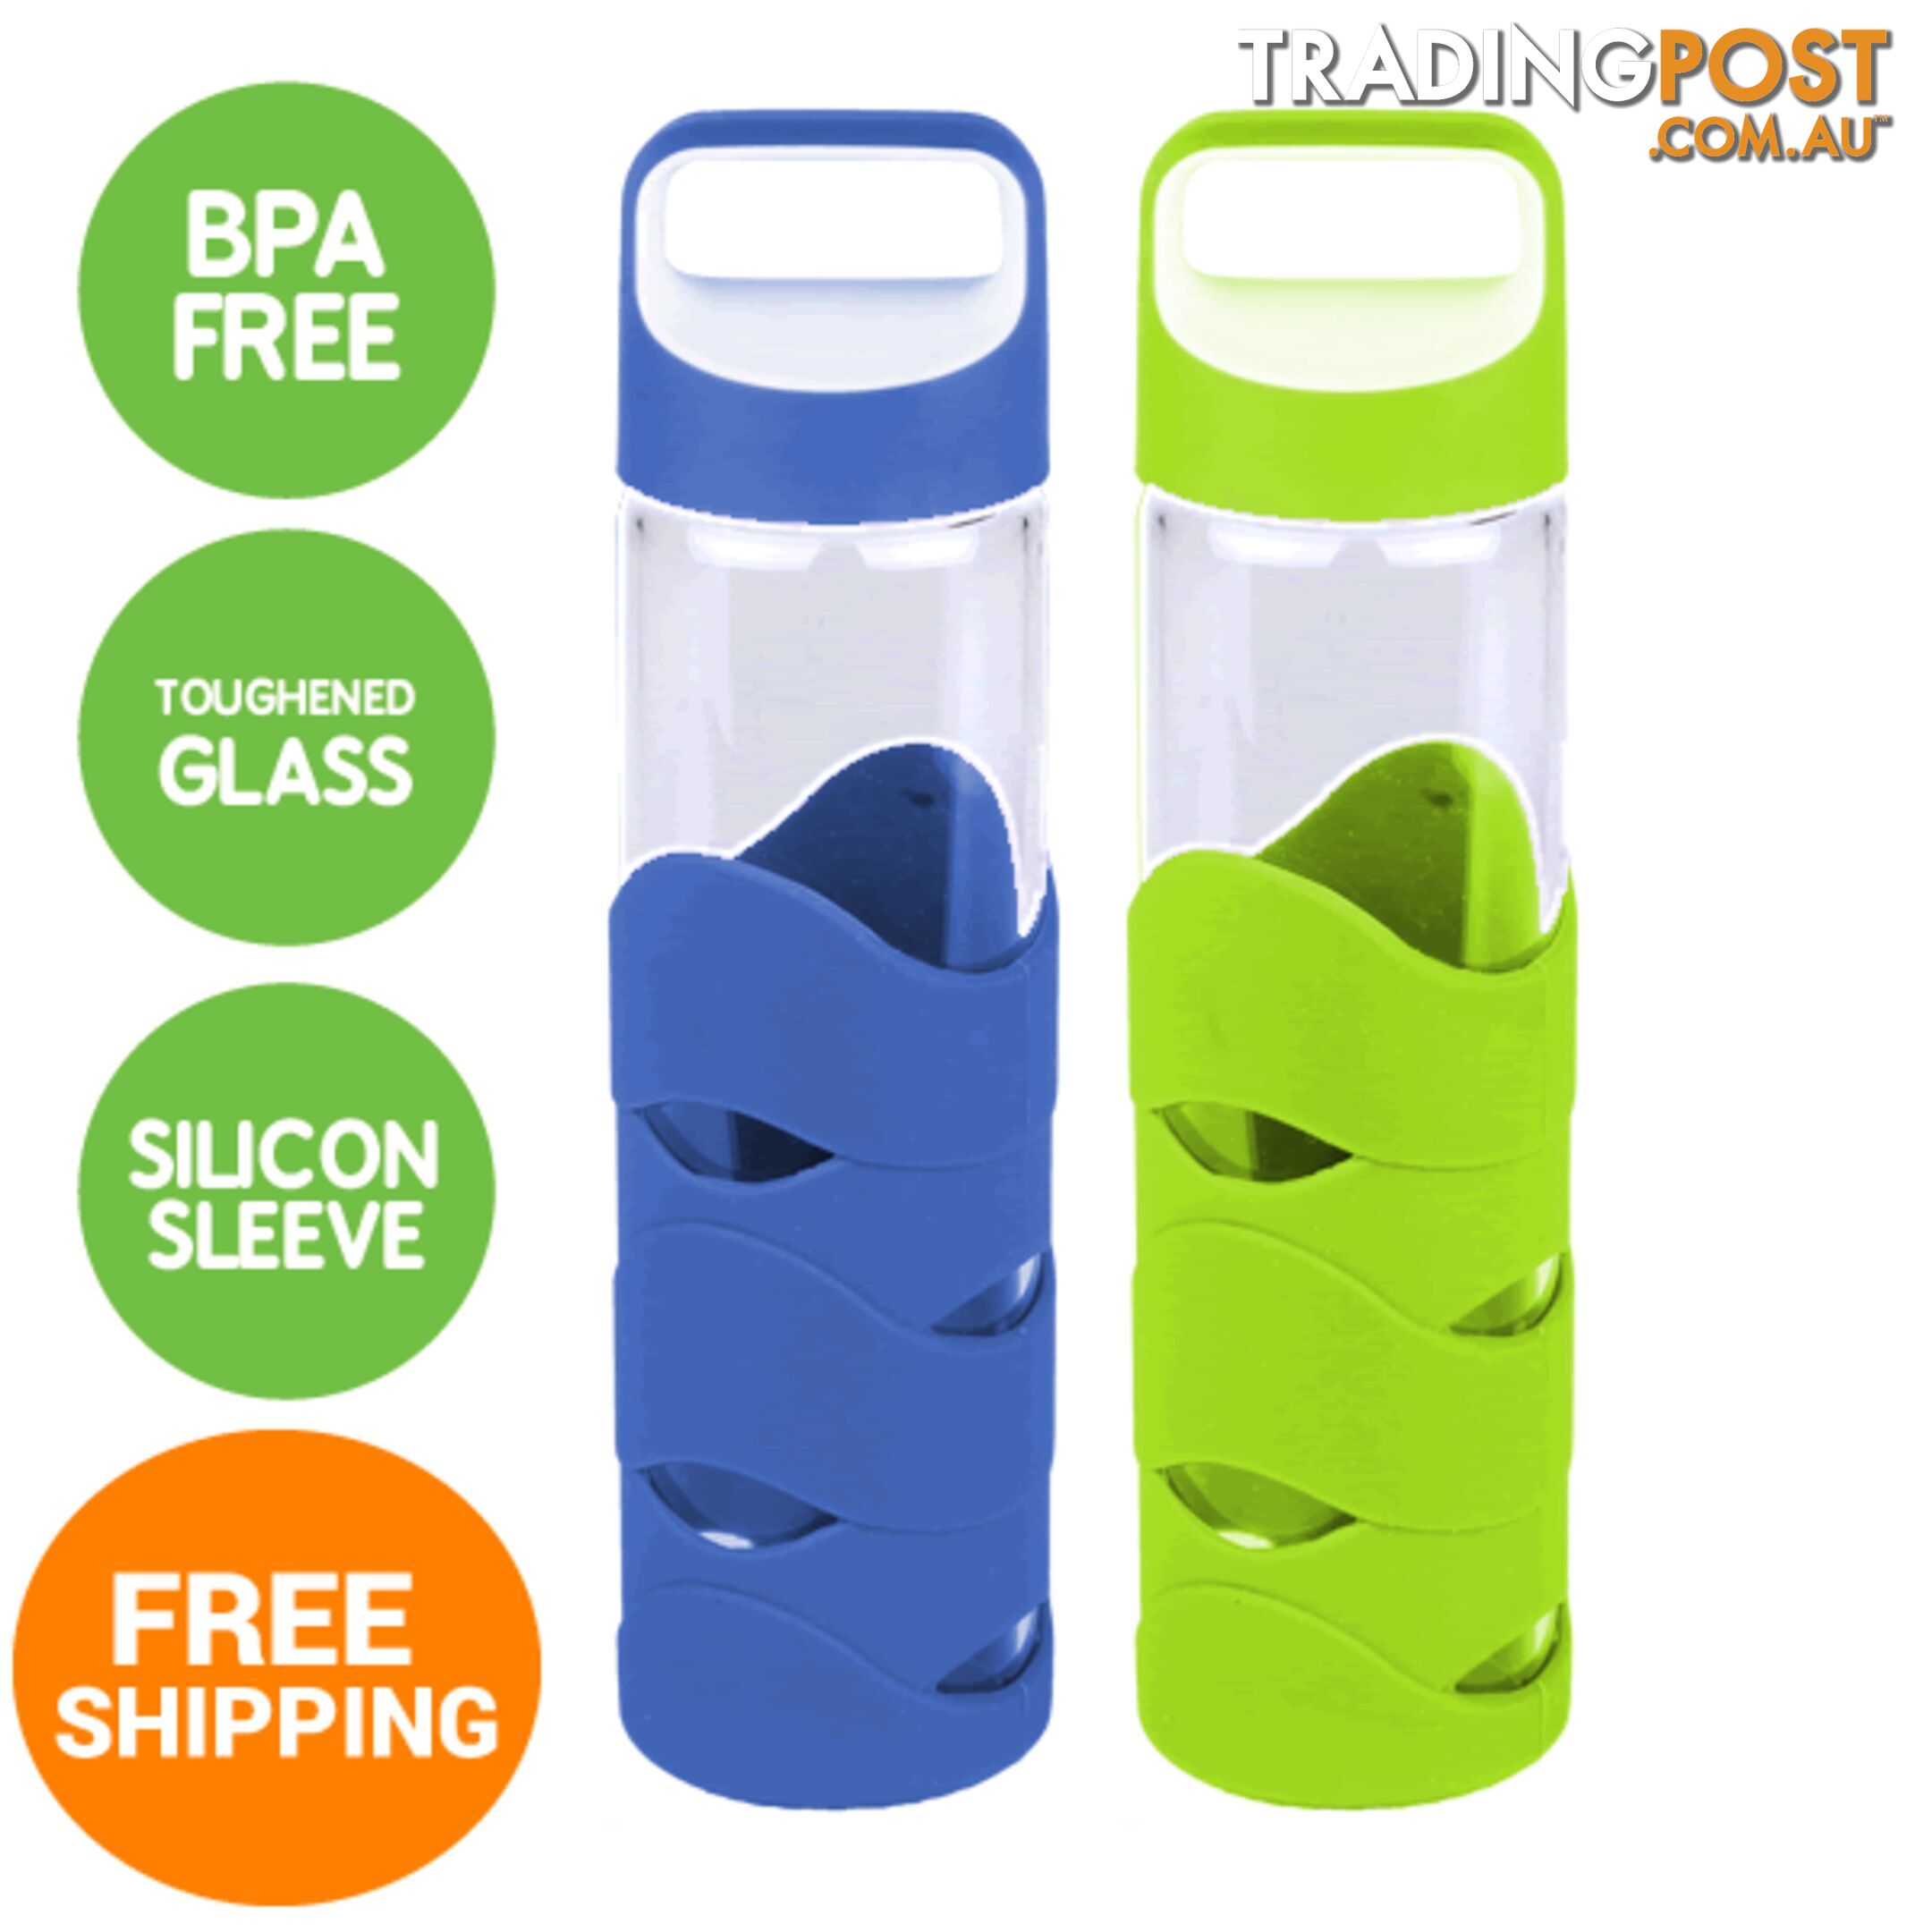 Glass Sports Bottles with BPA free lid x 2 - glassnew8